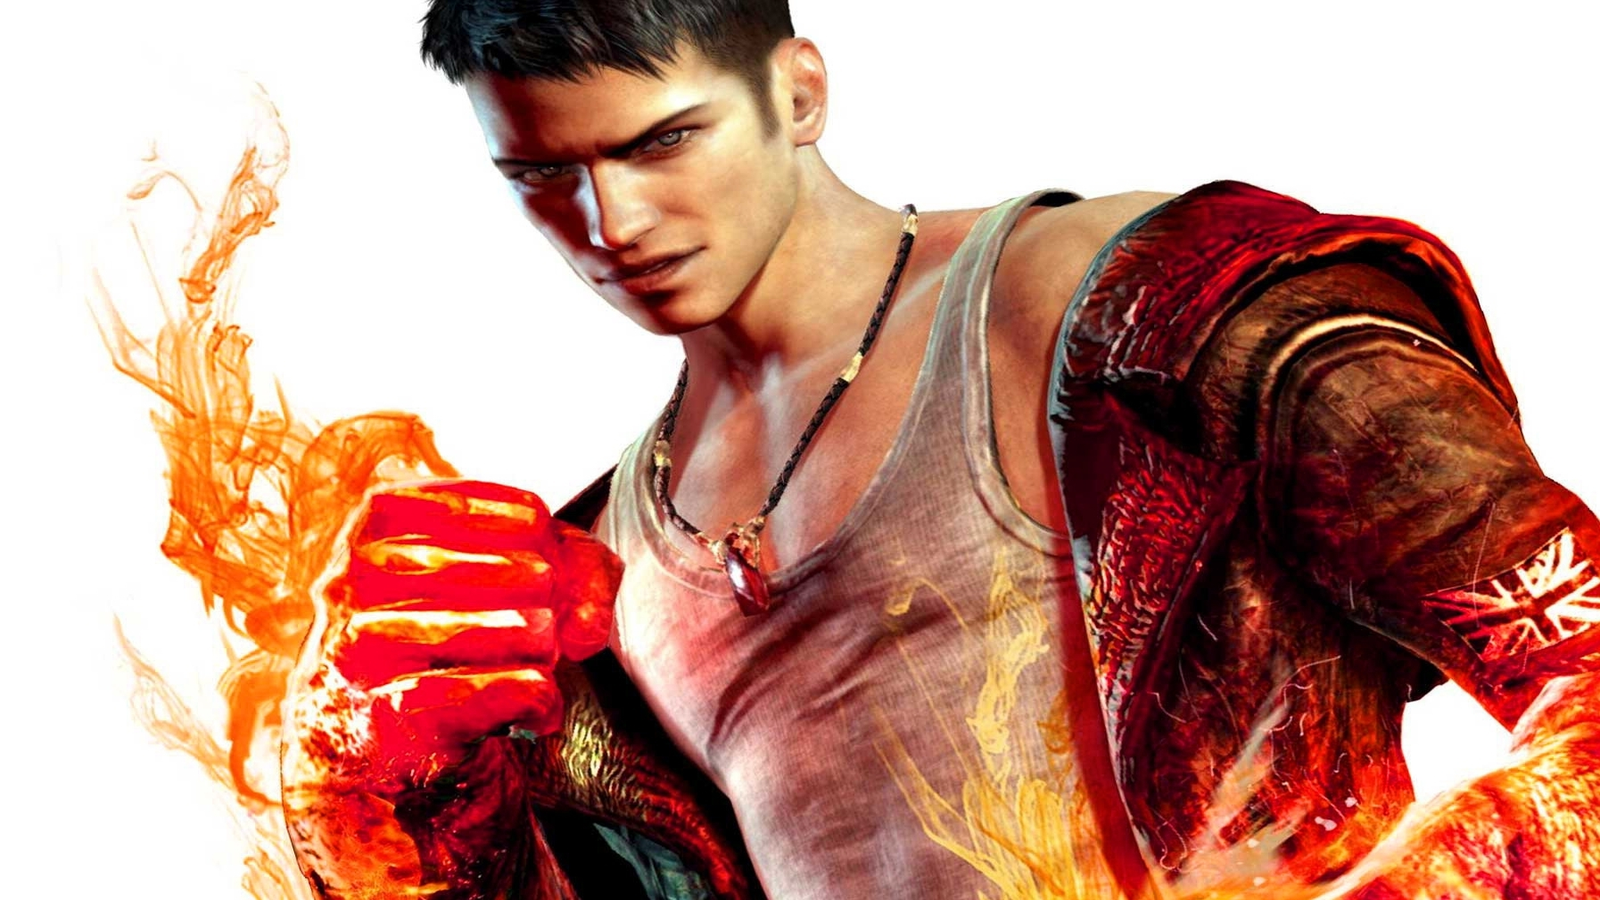 Ninja Theory and Capcom Reboot Devil May Cry with Unreal Engine 3